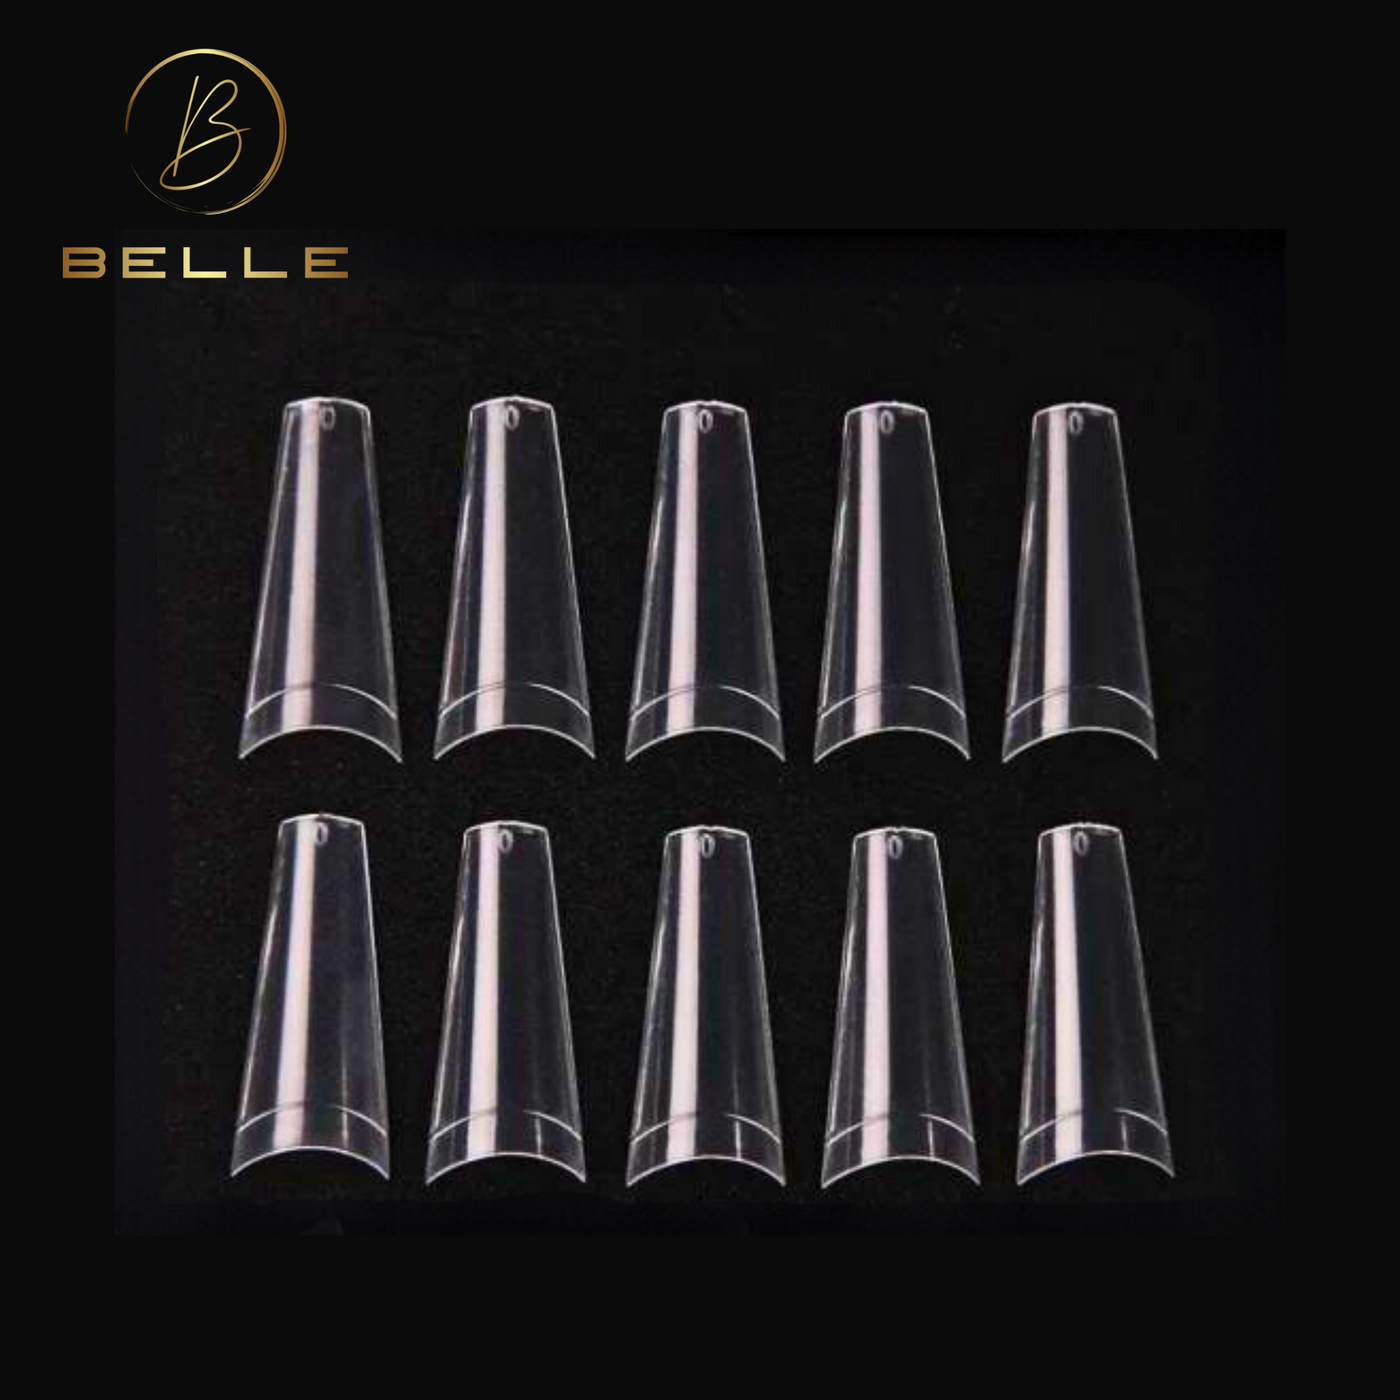 Belle Beauty coffin nail tips sizes